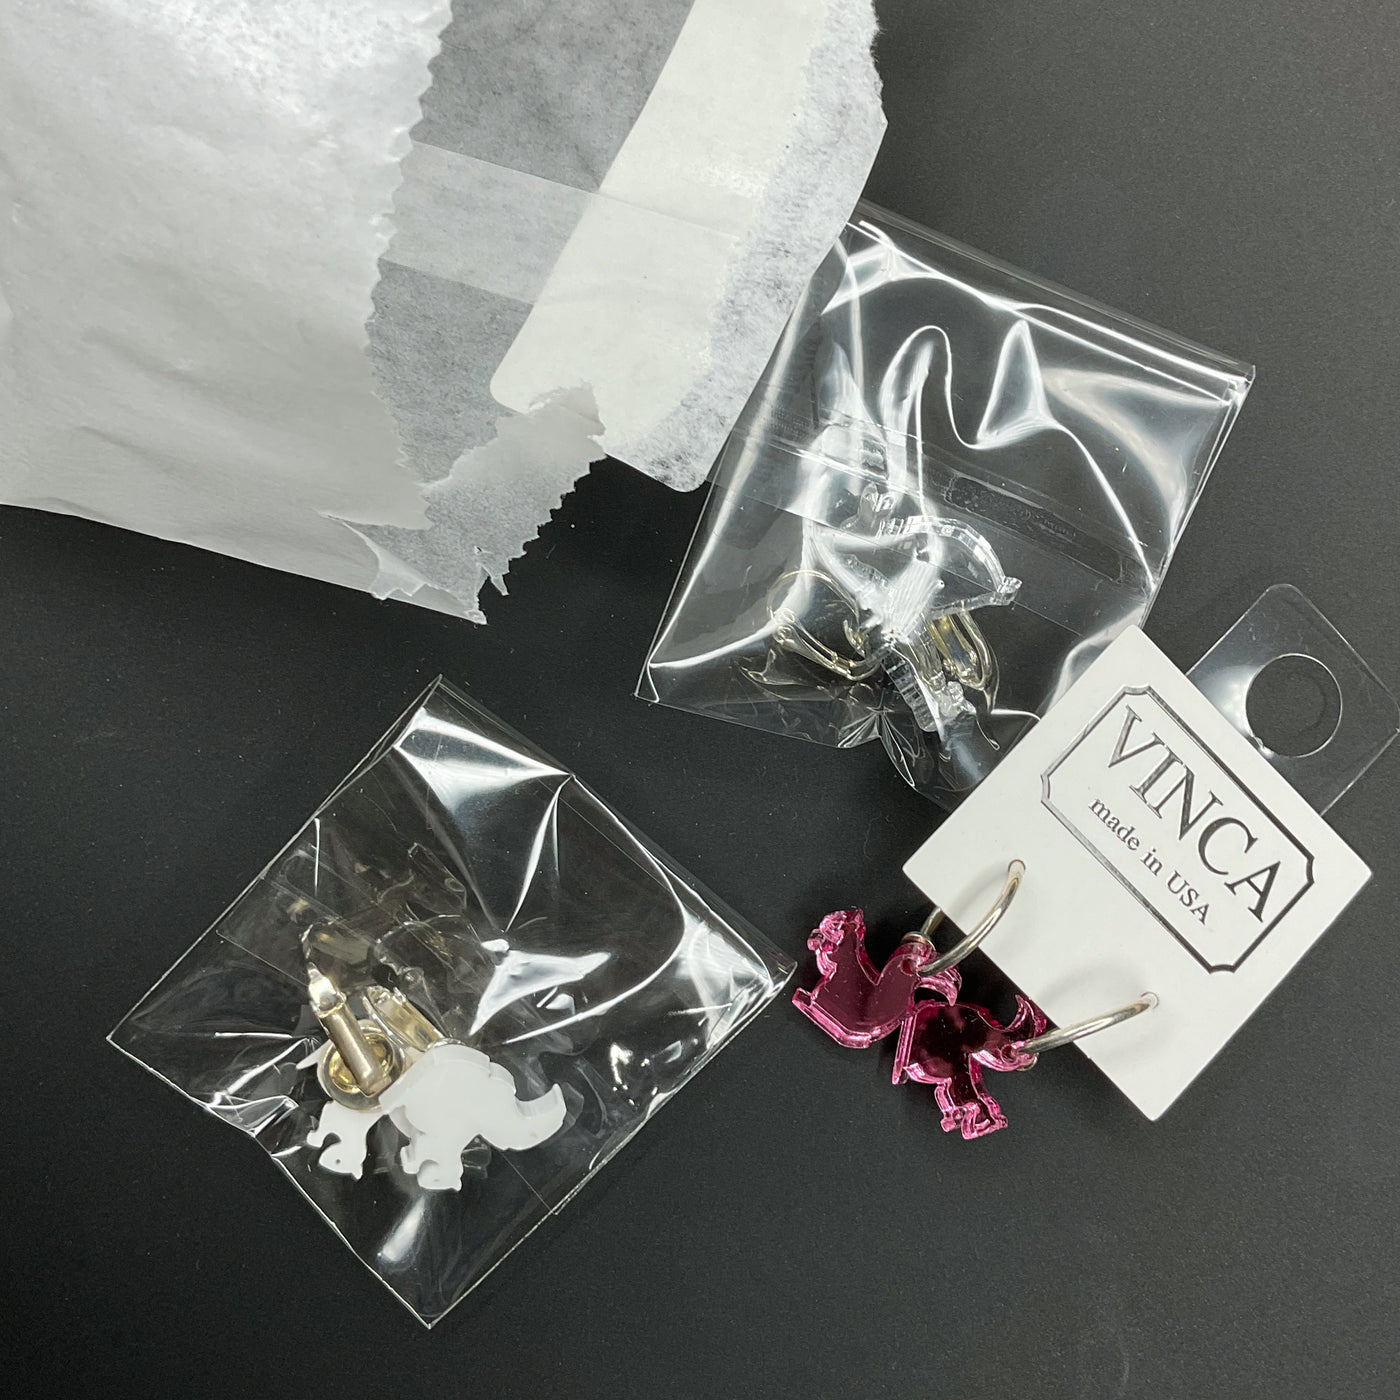 SALE! Clip-On Mini Mystery Bag - Clips ons and more!